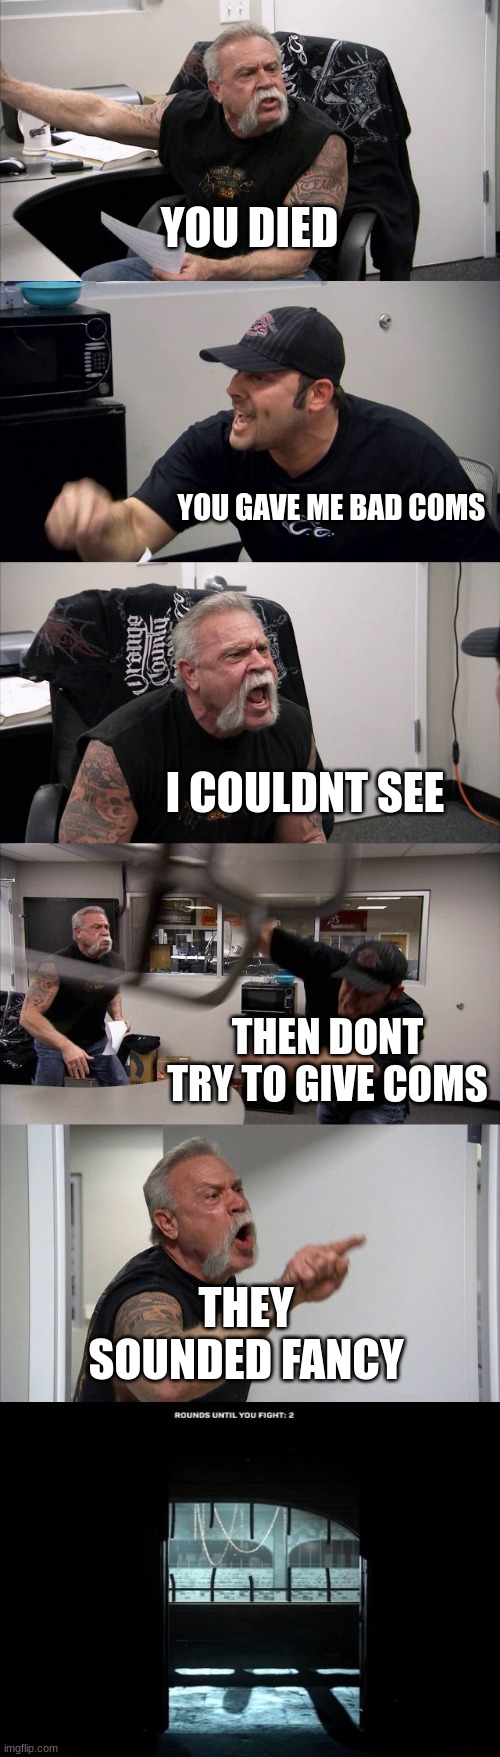 the bad coms |  YOU DIED; YOU GAVE ME BAD COMS; I COULDNT SEE; THEN DONT TRY TO GIVE COMS; THEY SOUNDED FANCY | image tagged in memes,american chopper argument | made w/ Imgflip meme maker